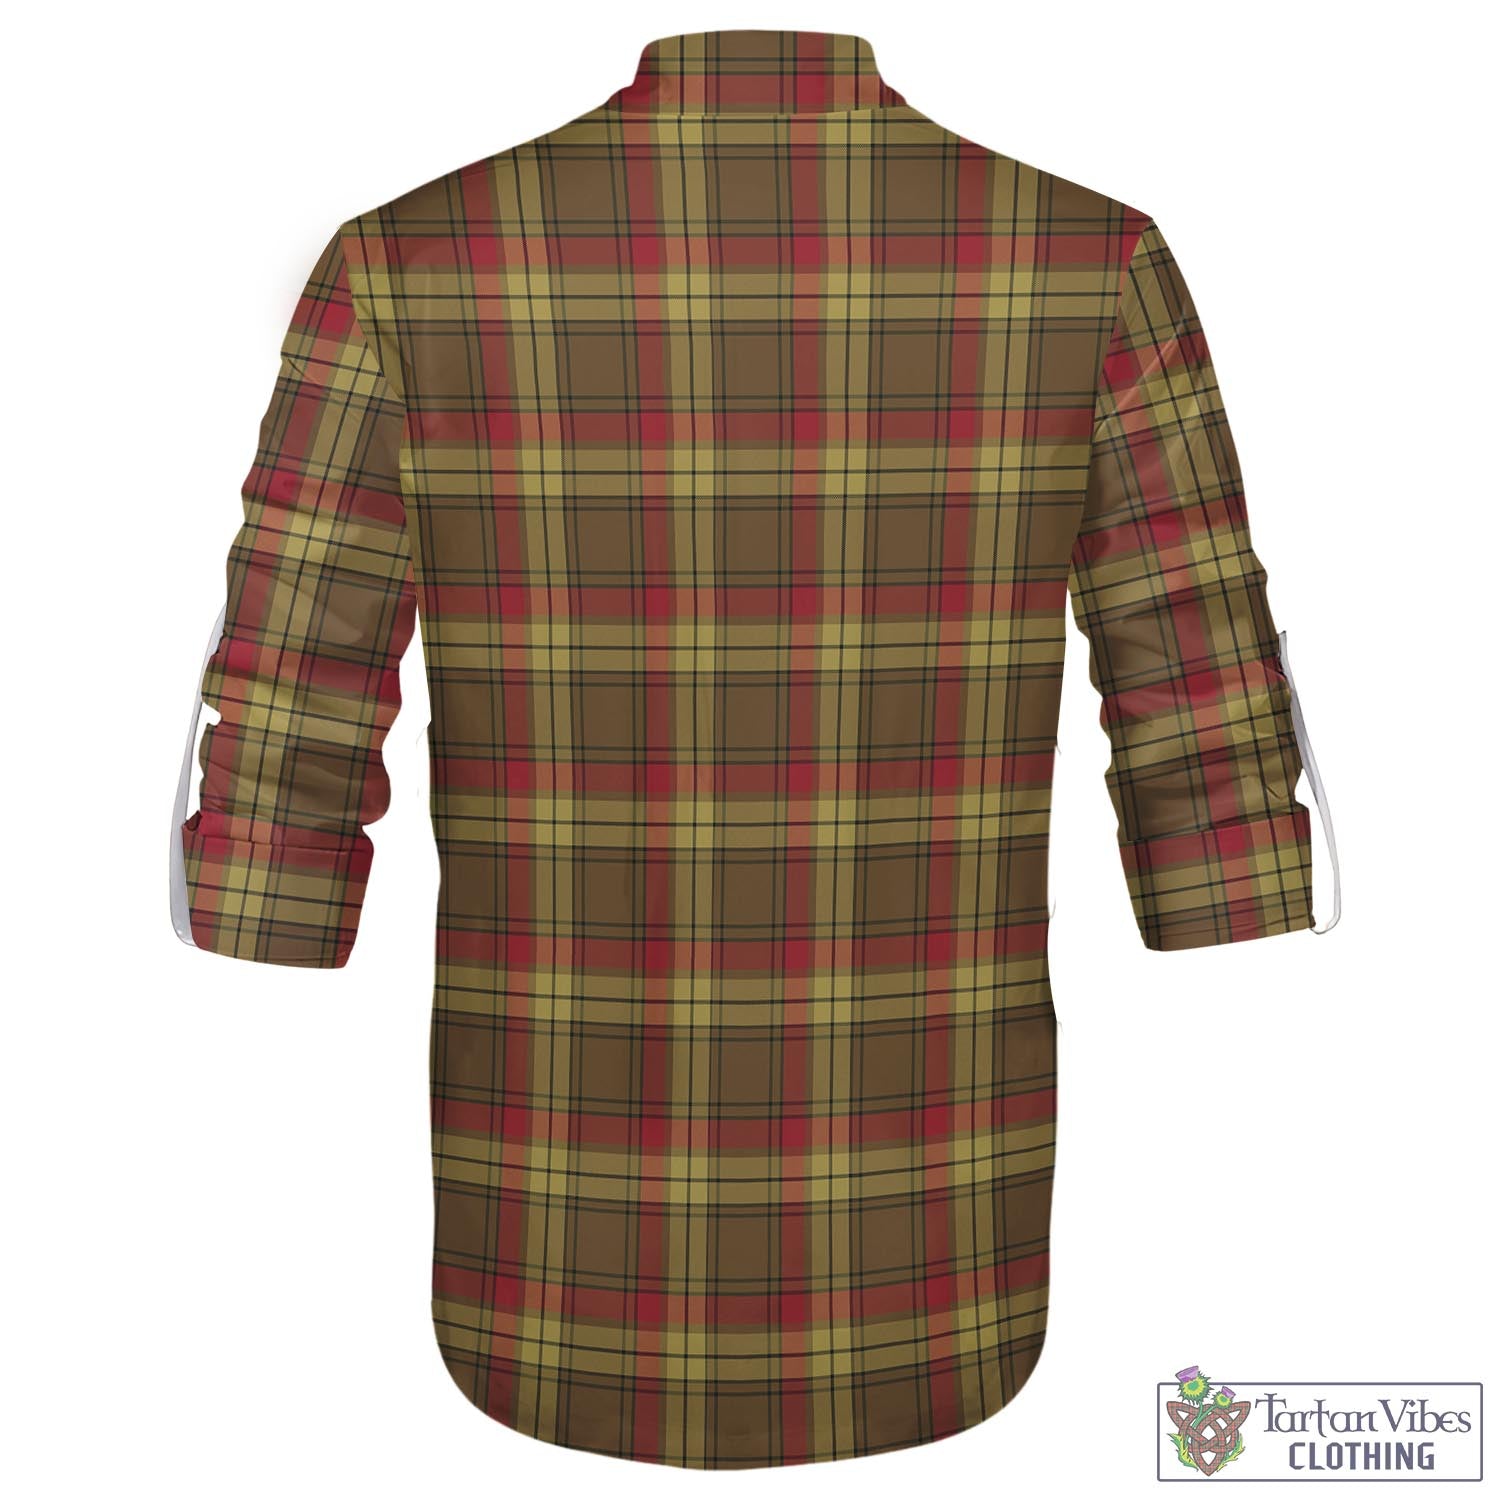 Tartan Vibes Clothing MacMillan Old Weathered Tartan Men's Scottish Traditional Jacobite Ghillie Kilt Shirt with Family Crest